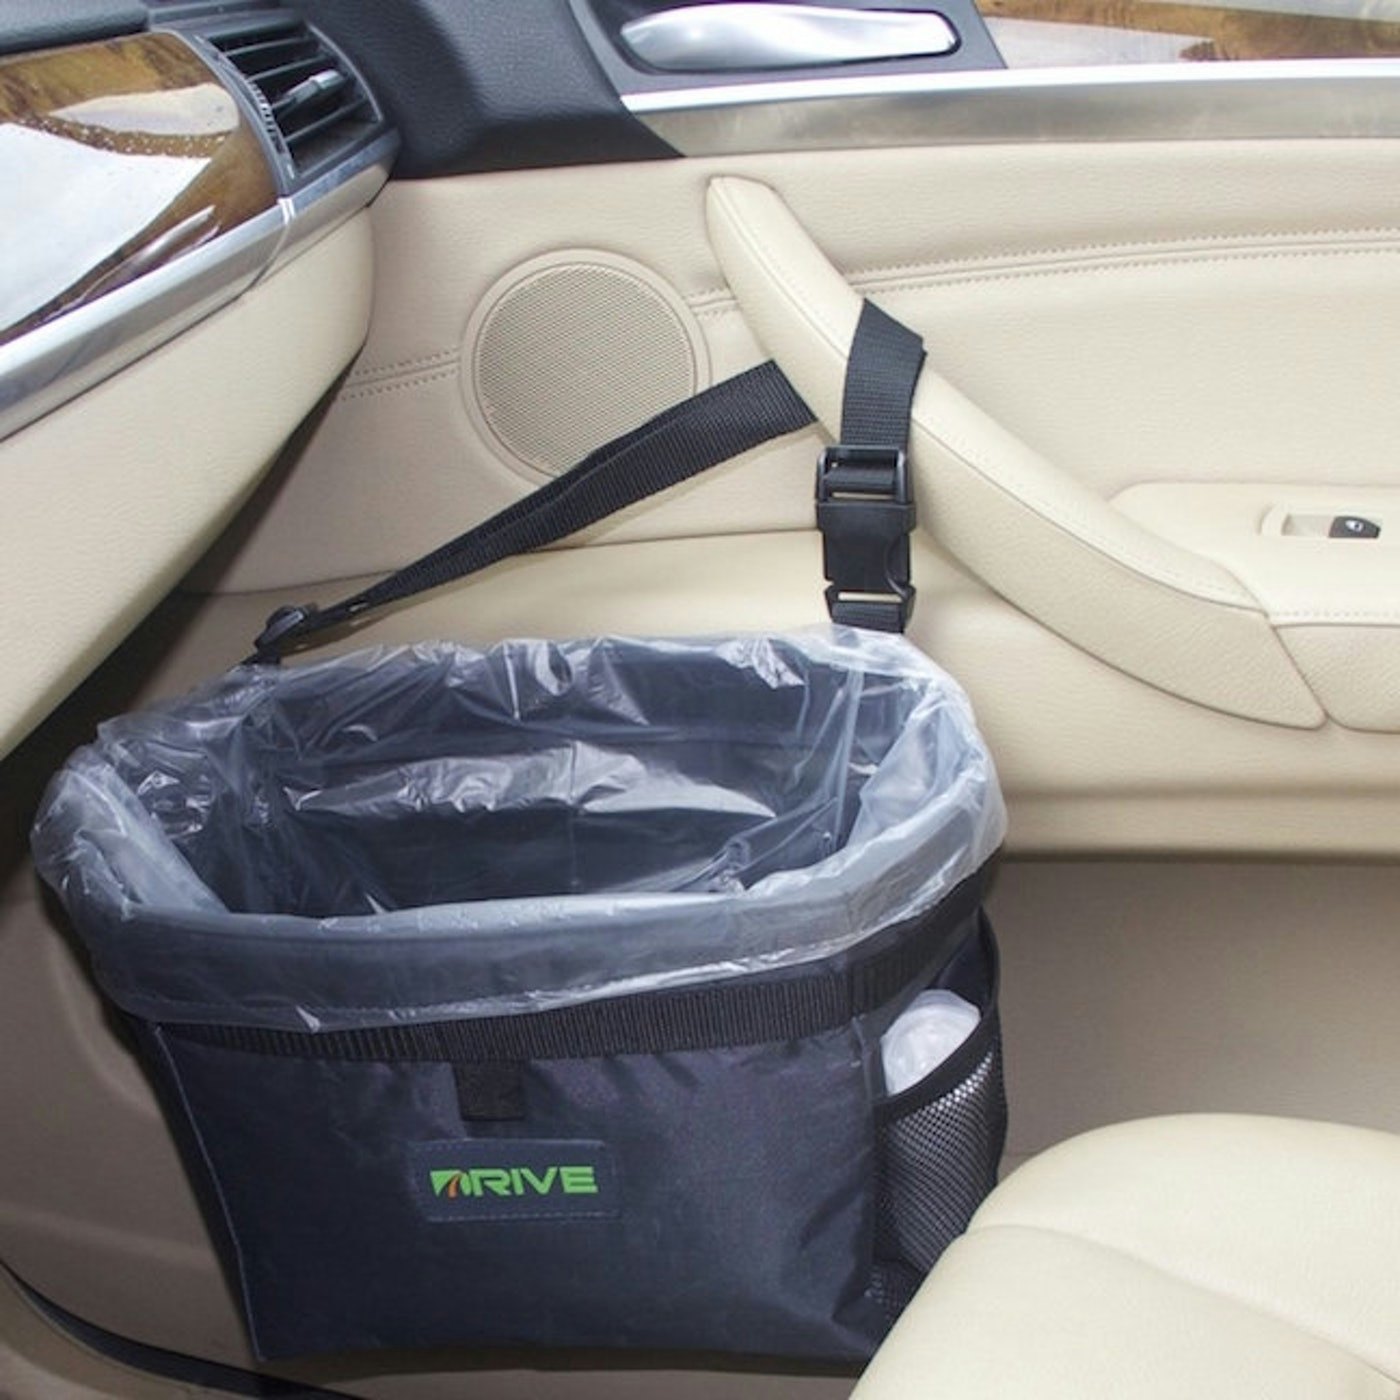 12 Useful Car Accessories That You Actually Need